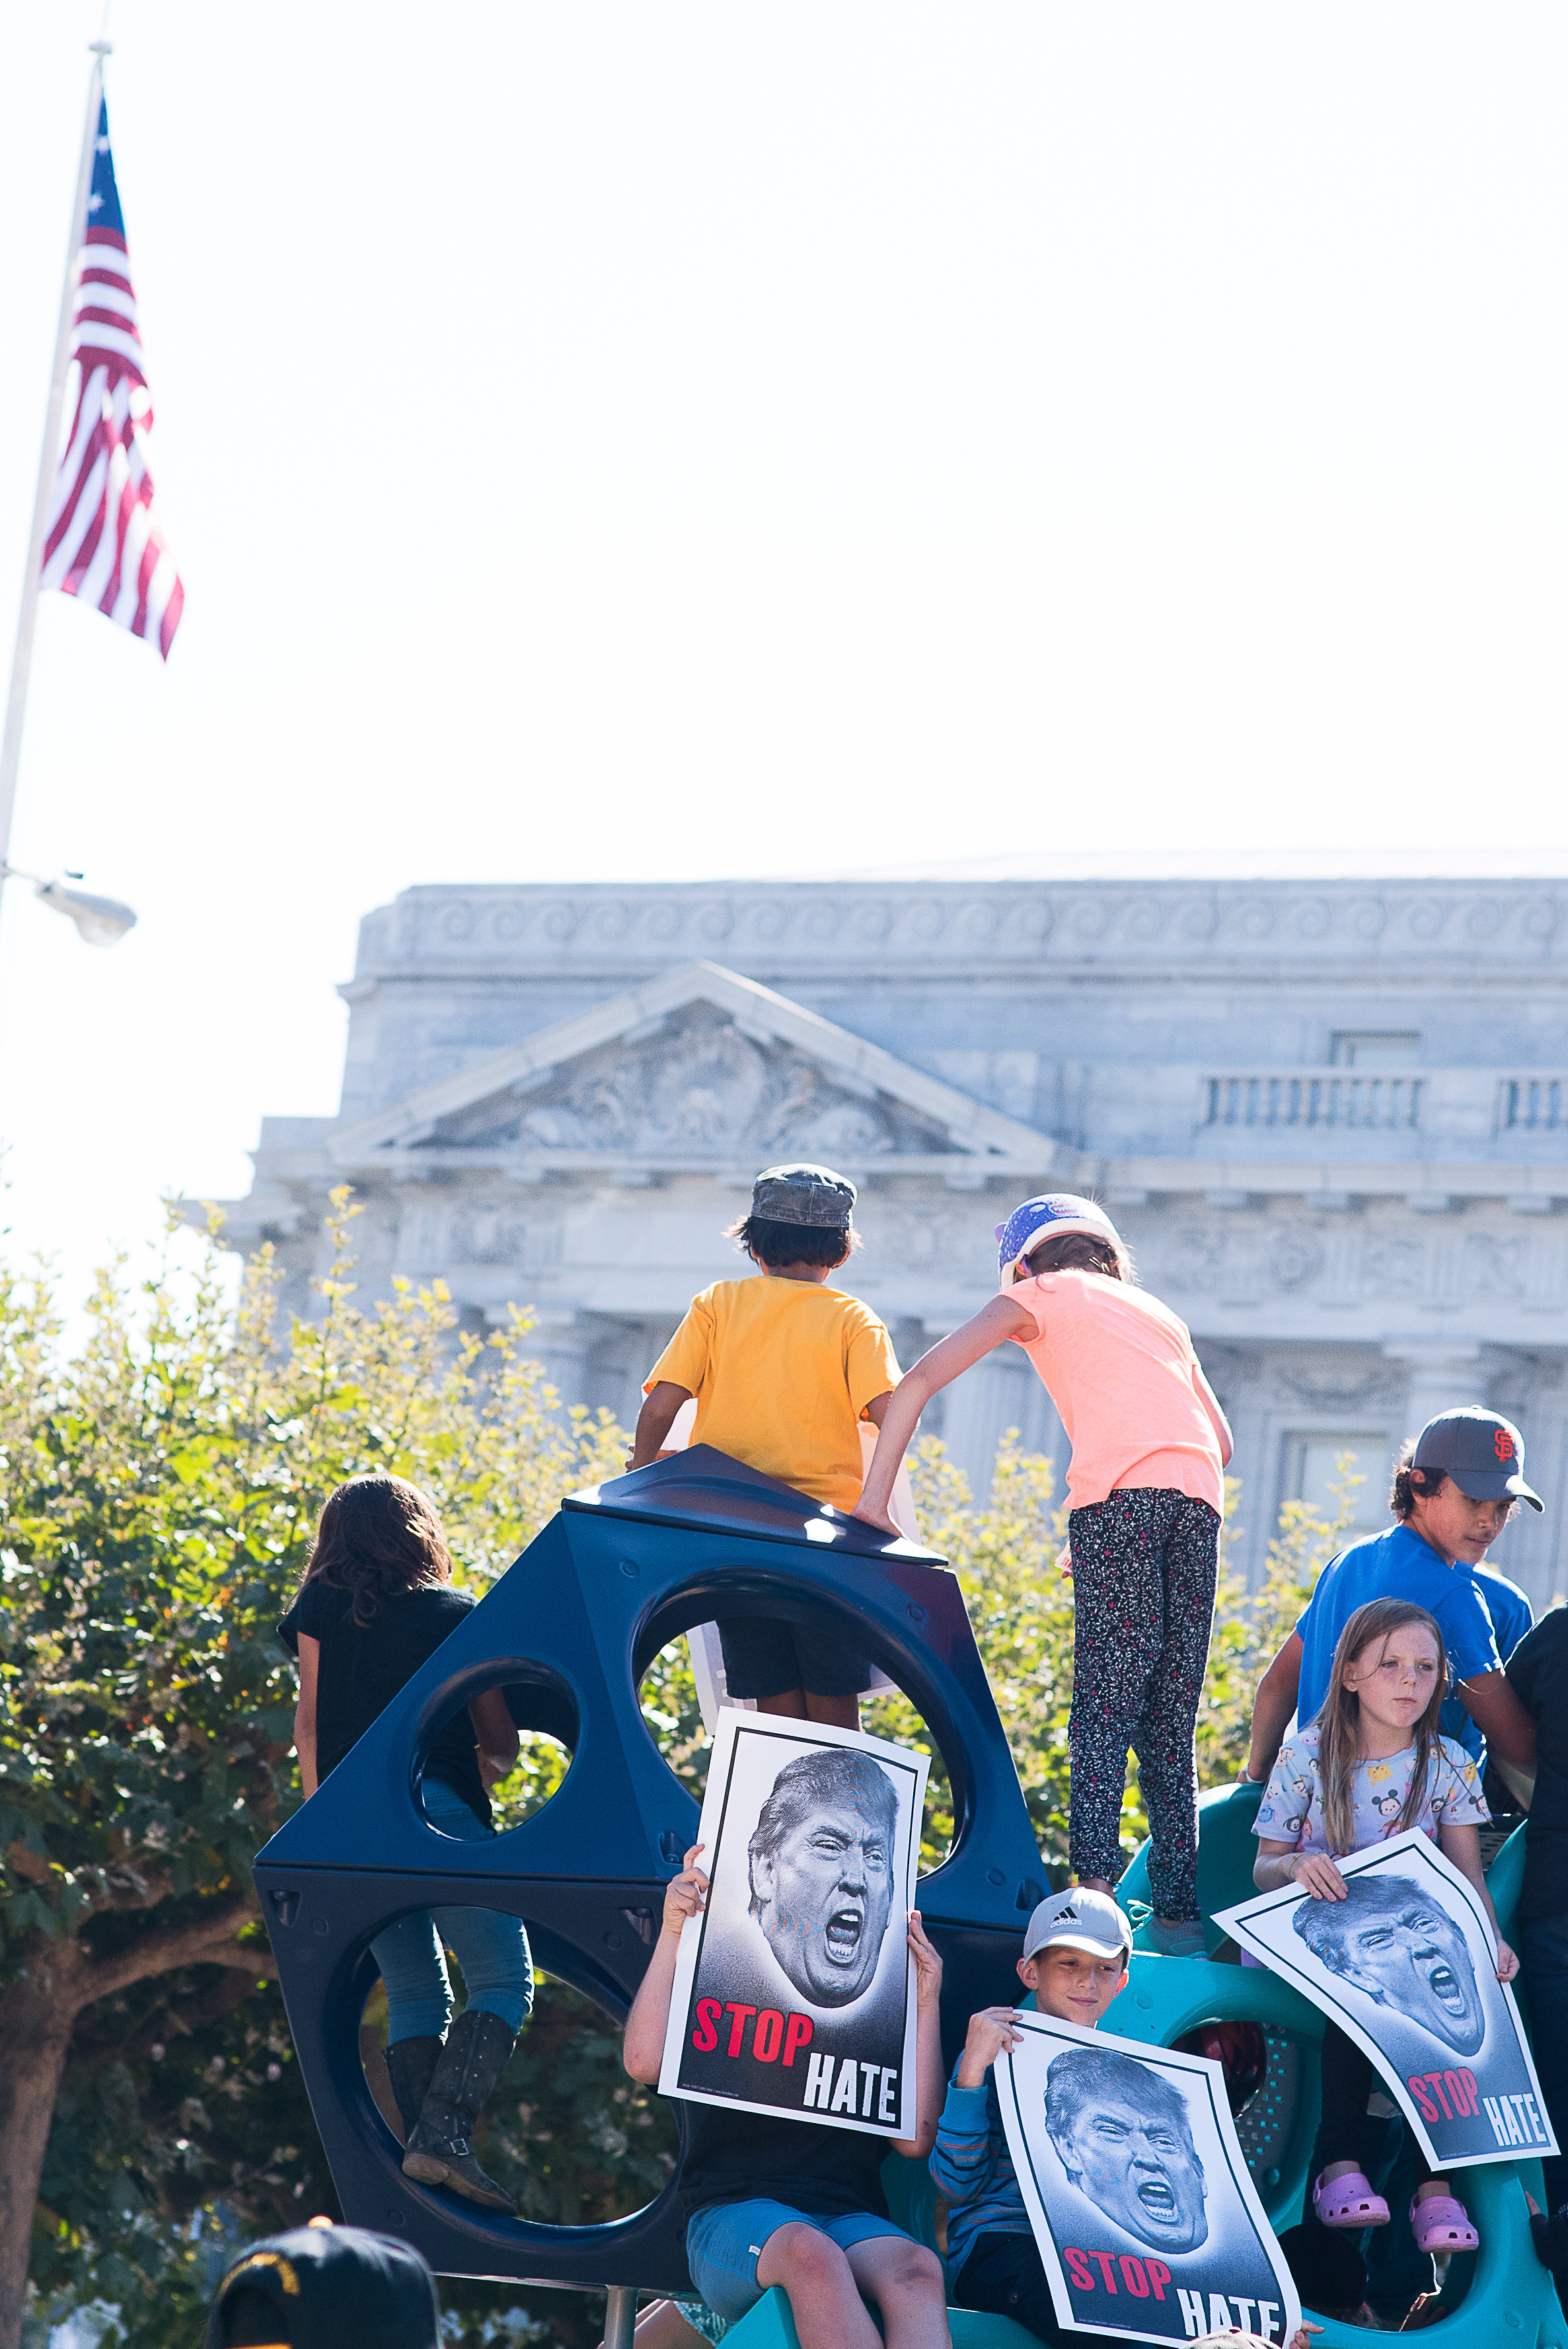 Children of demonstrators on play structure before City Hall at counter-demonstration. Photo taken on Aug 26, 2017 by Otto Pippenger.